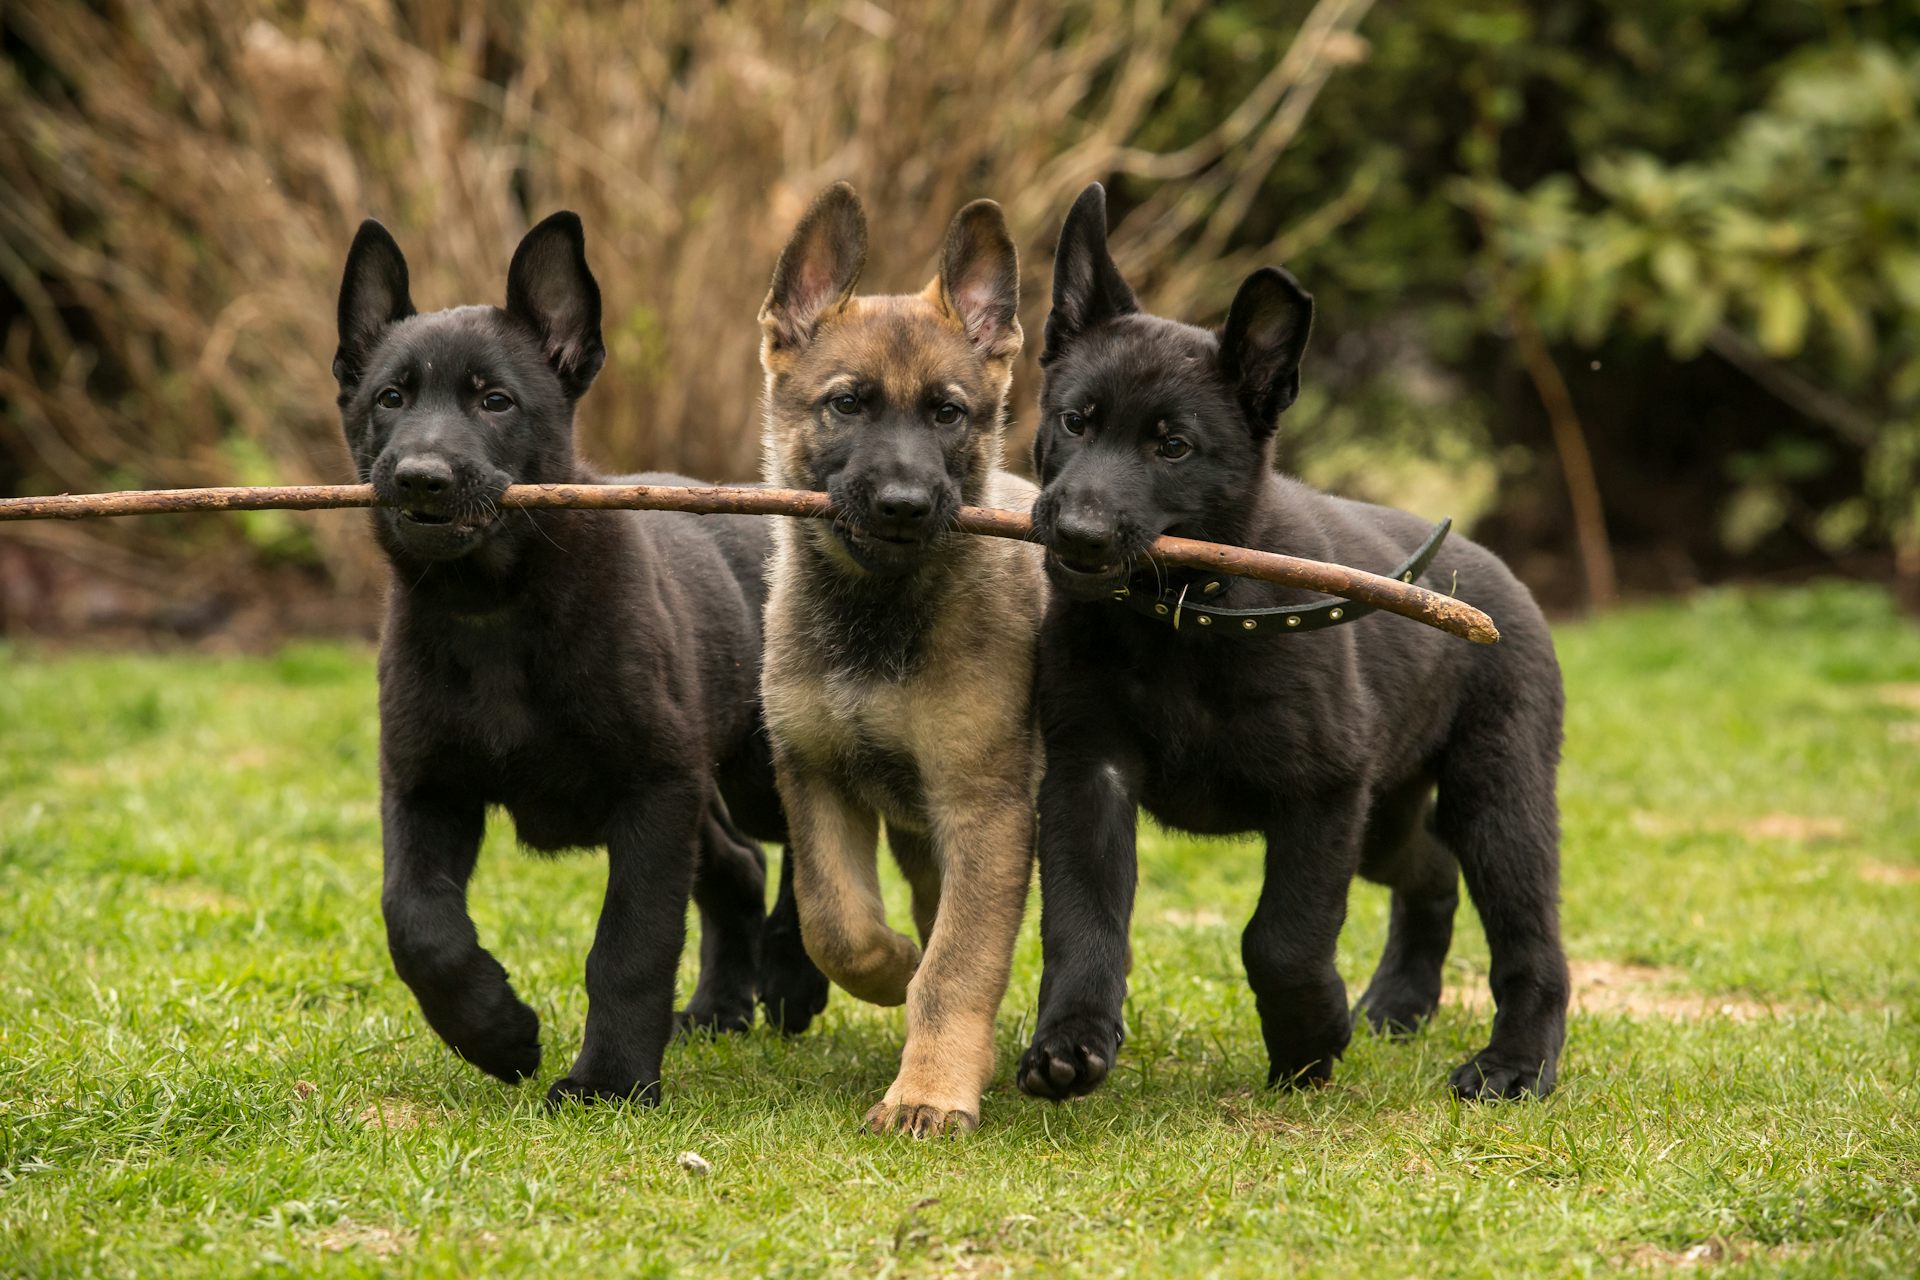 Three puppies holding onto a branch.